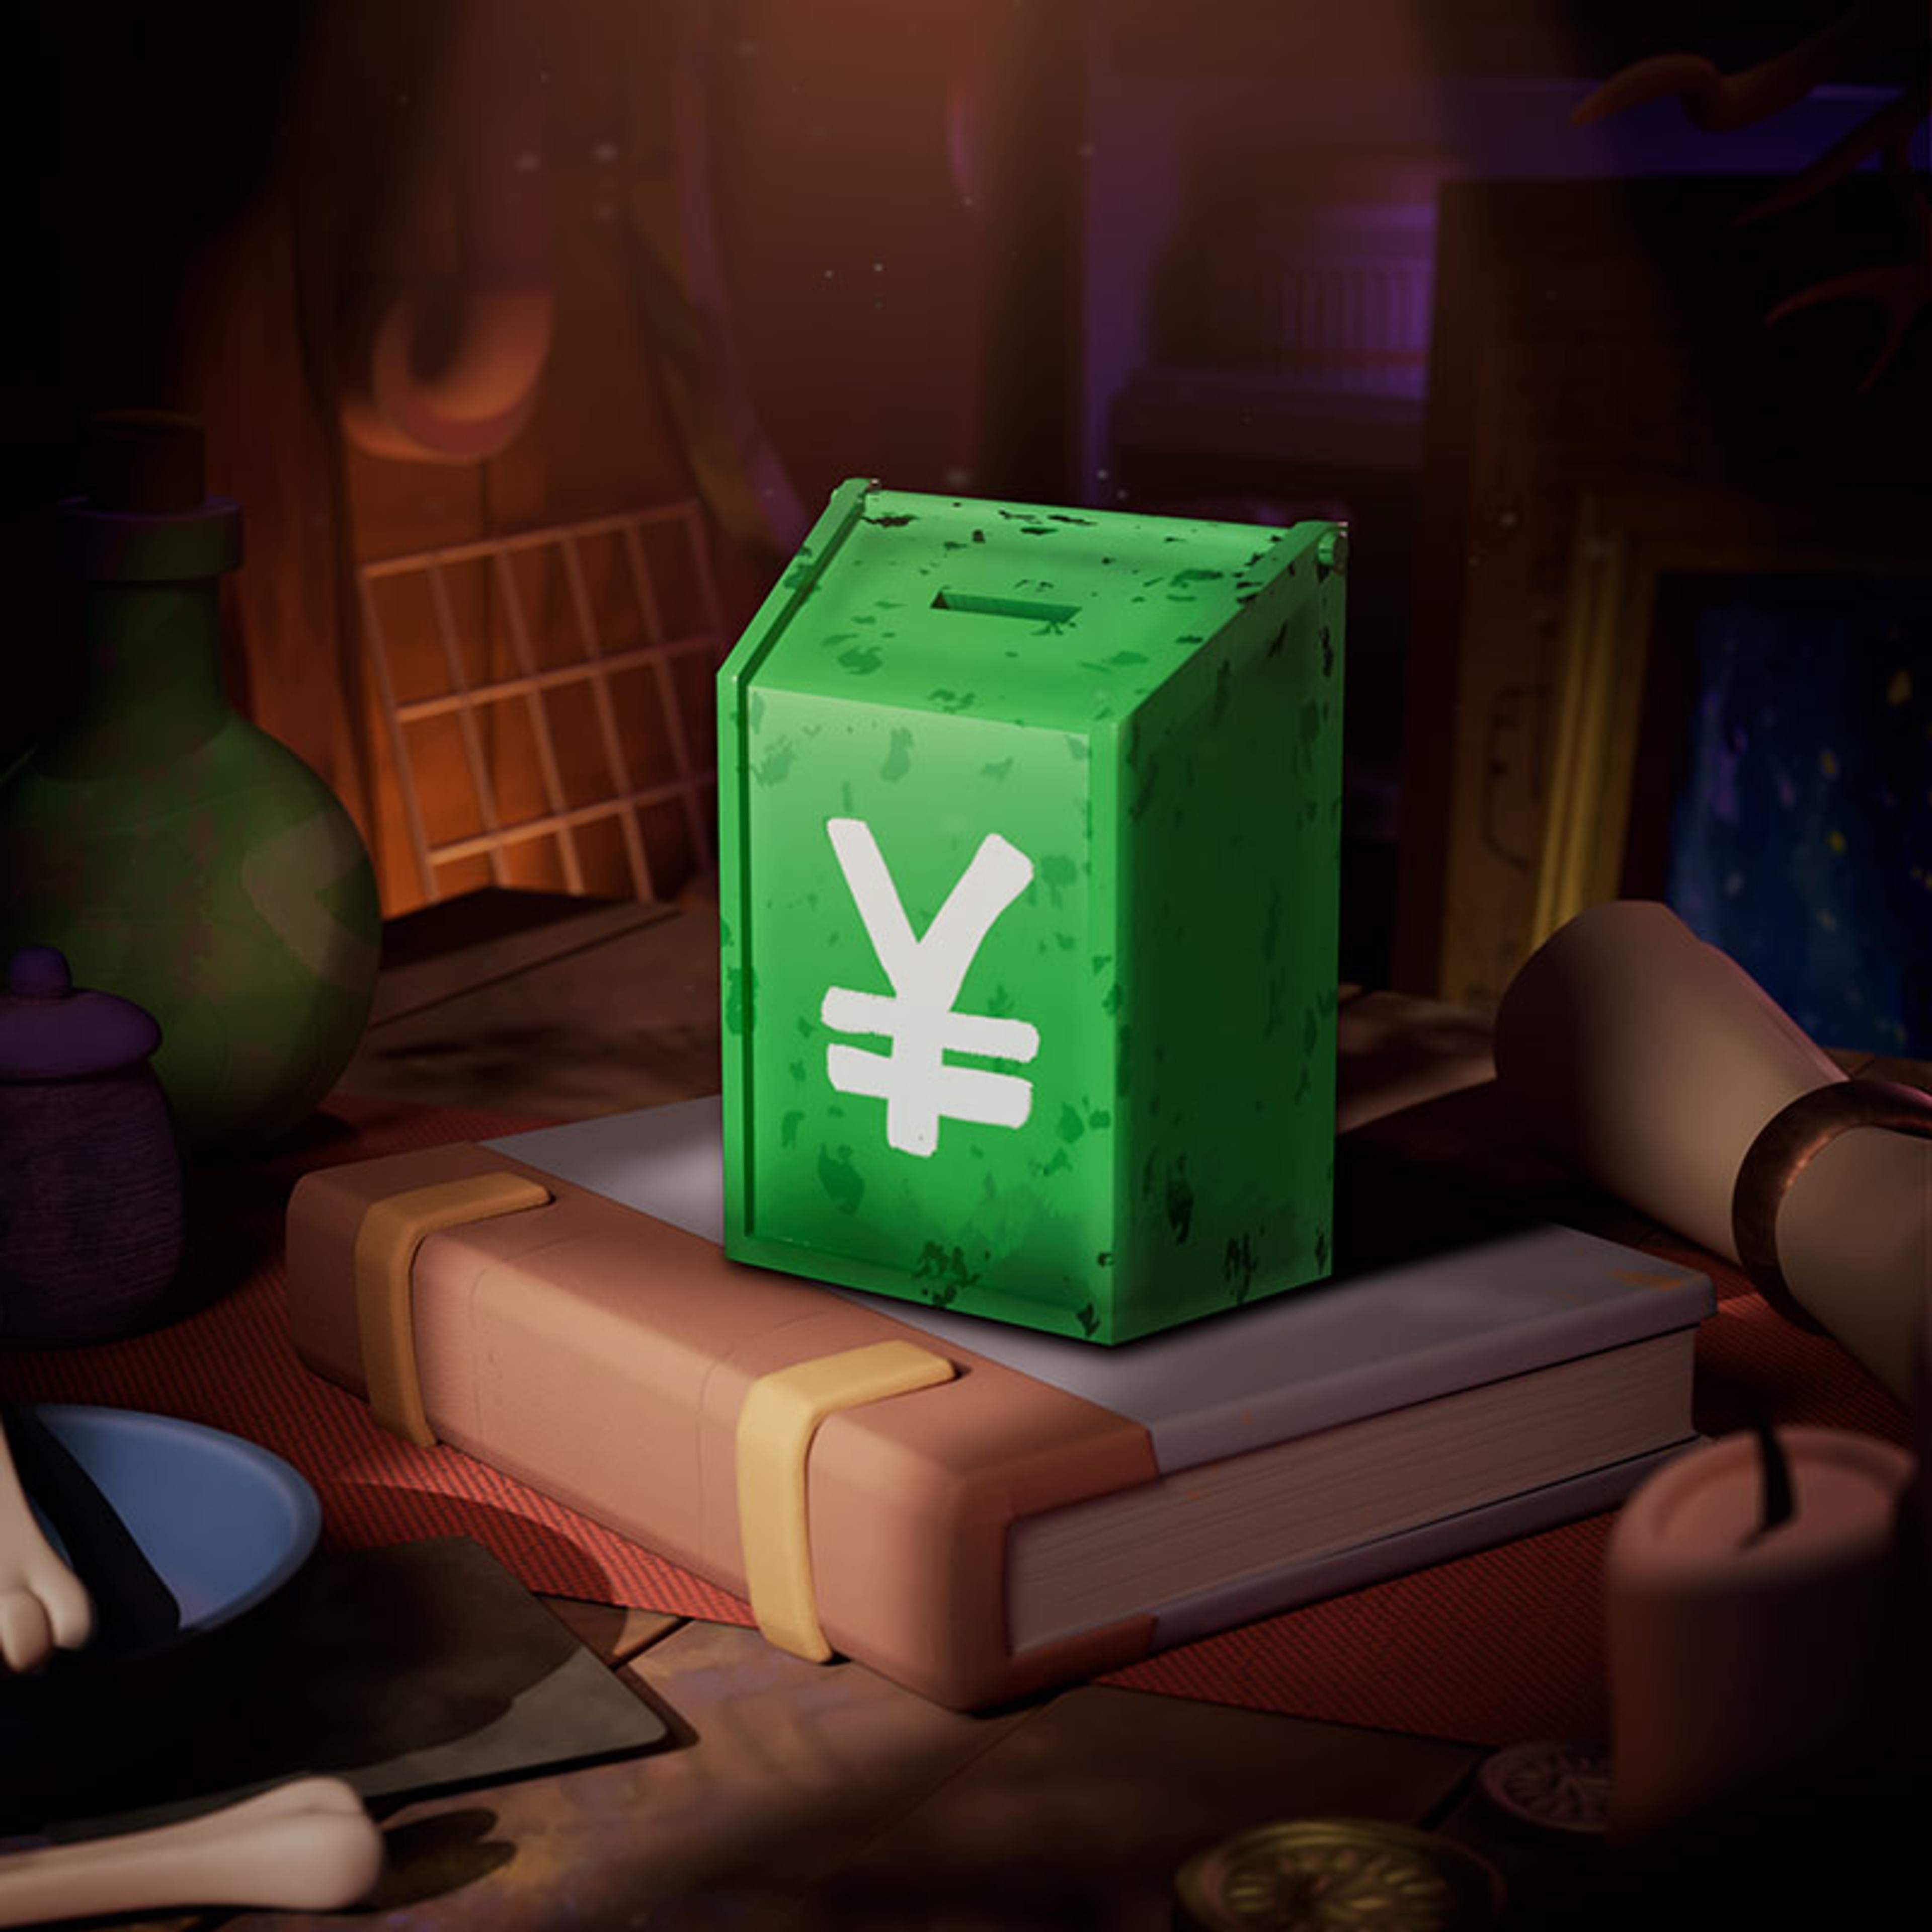 A green box with a coin slot on top.